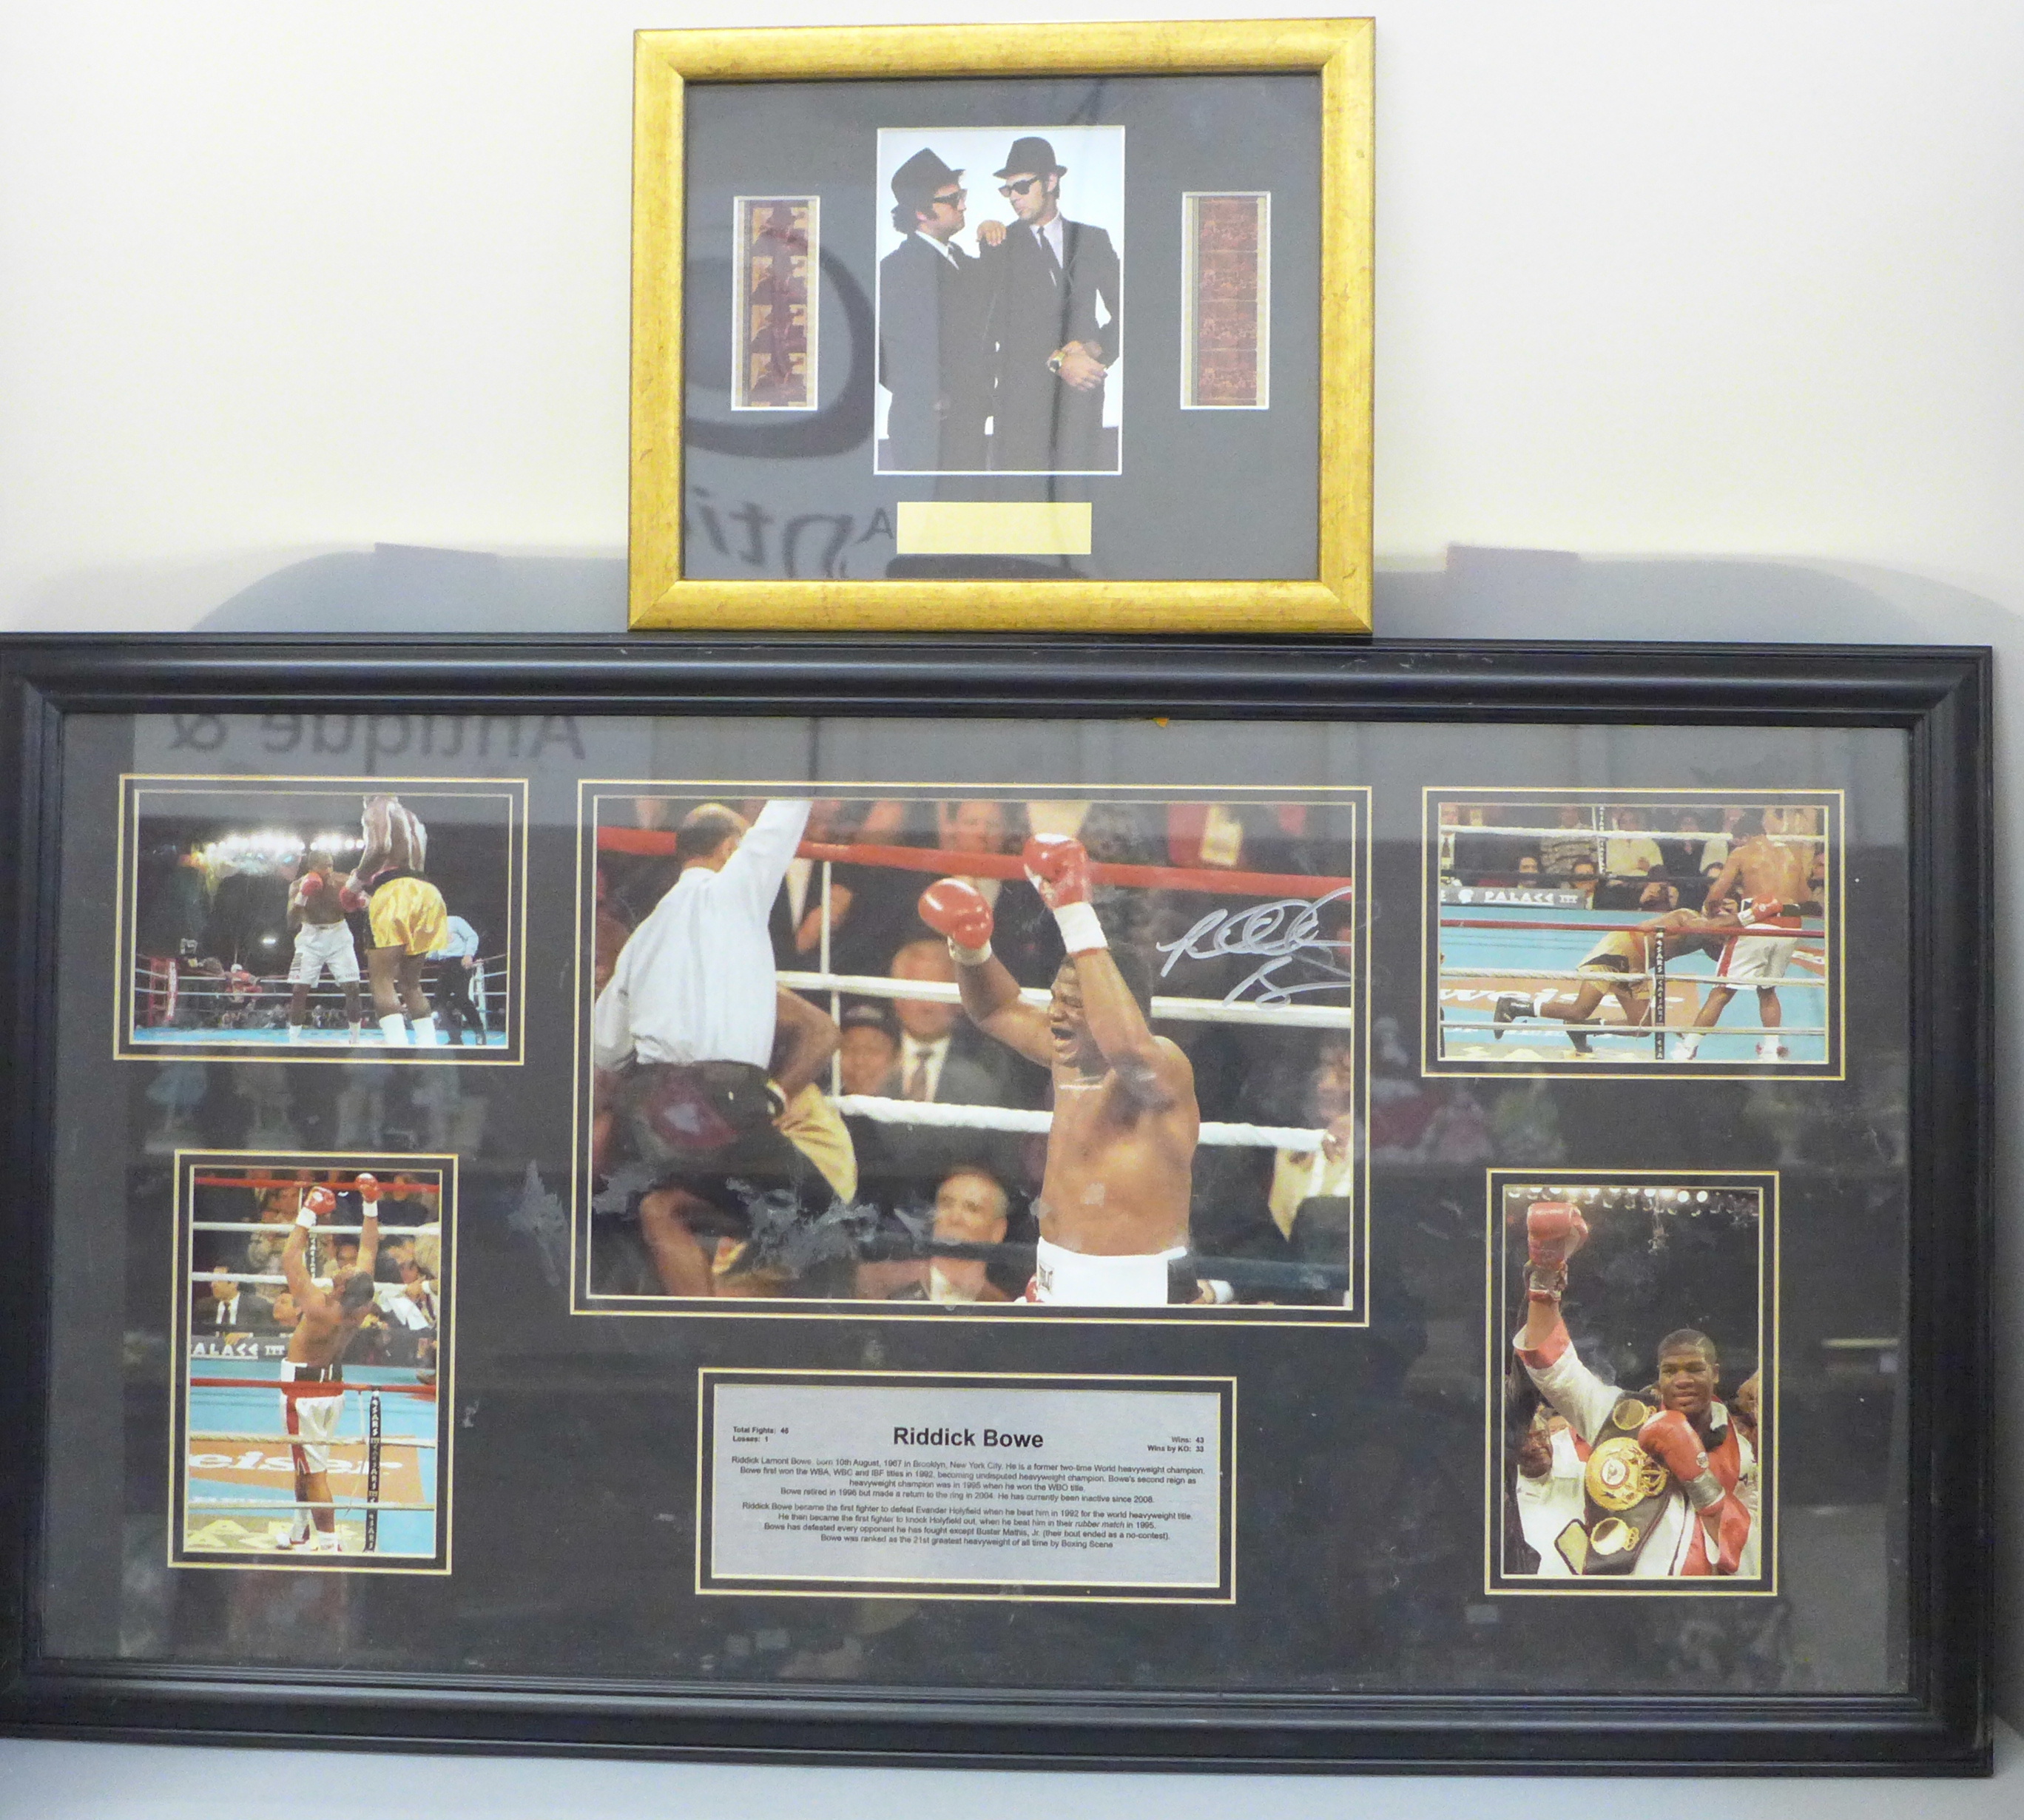 A Riddick Bowe photo montage, main photo signed, with presentation plaque, framed and a Blues